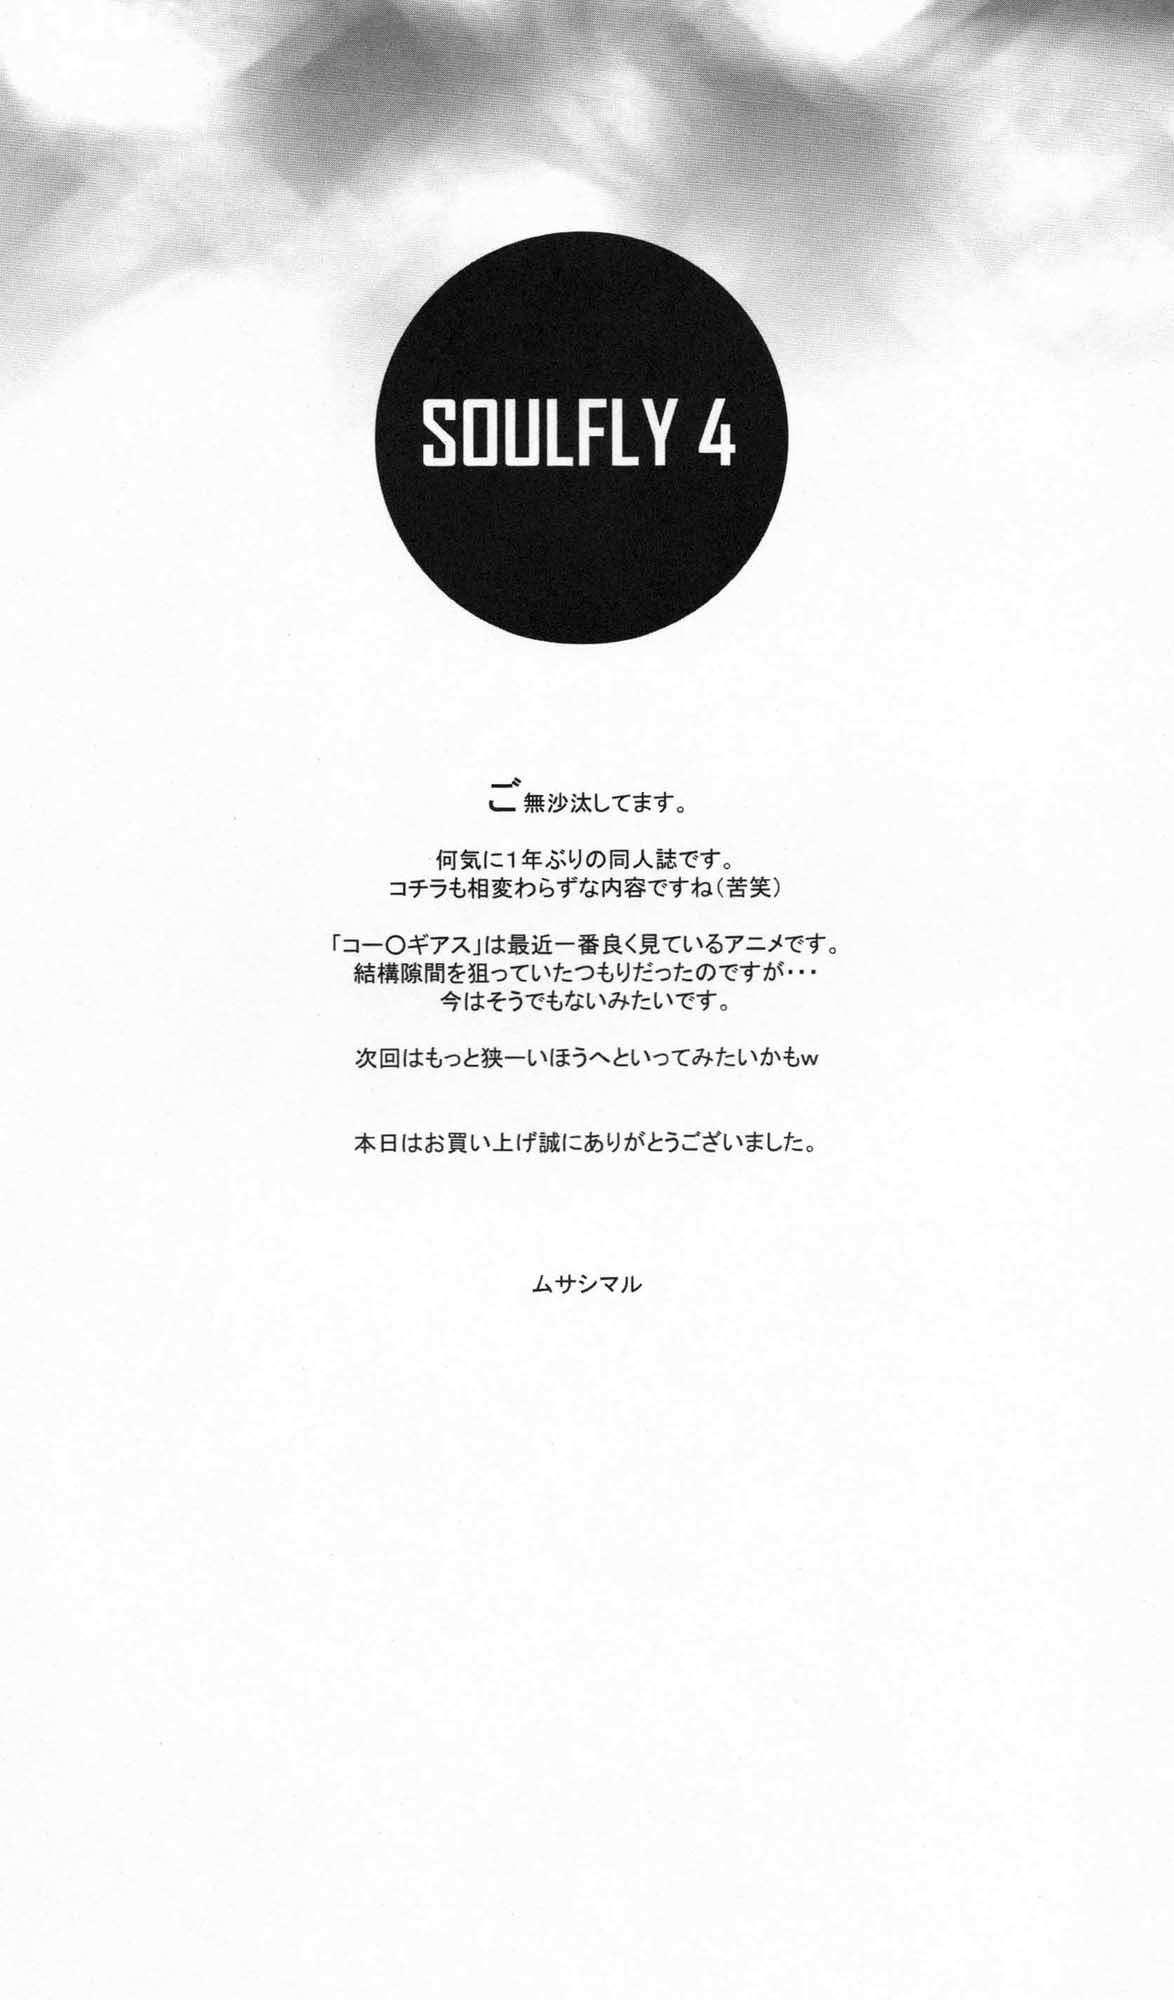 SOULFLY 4 19